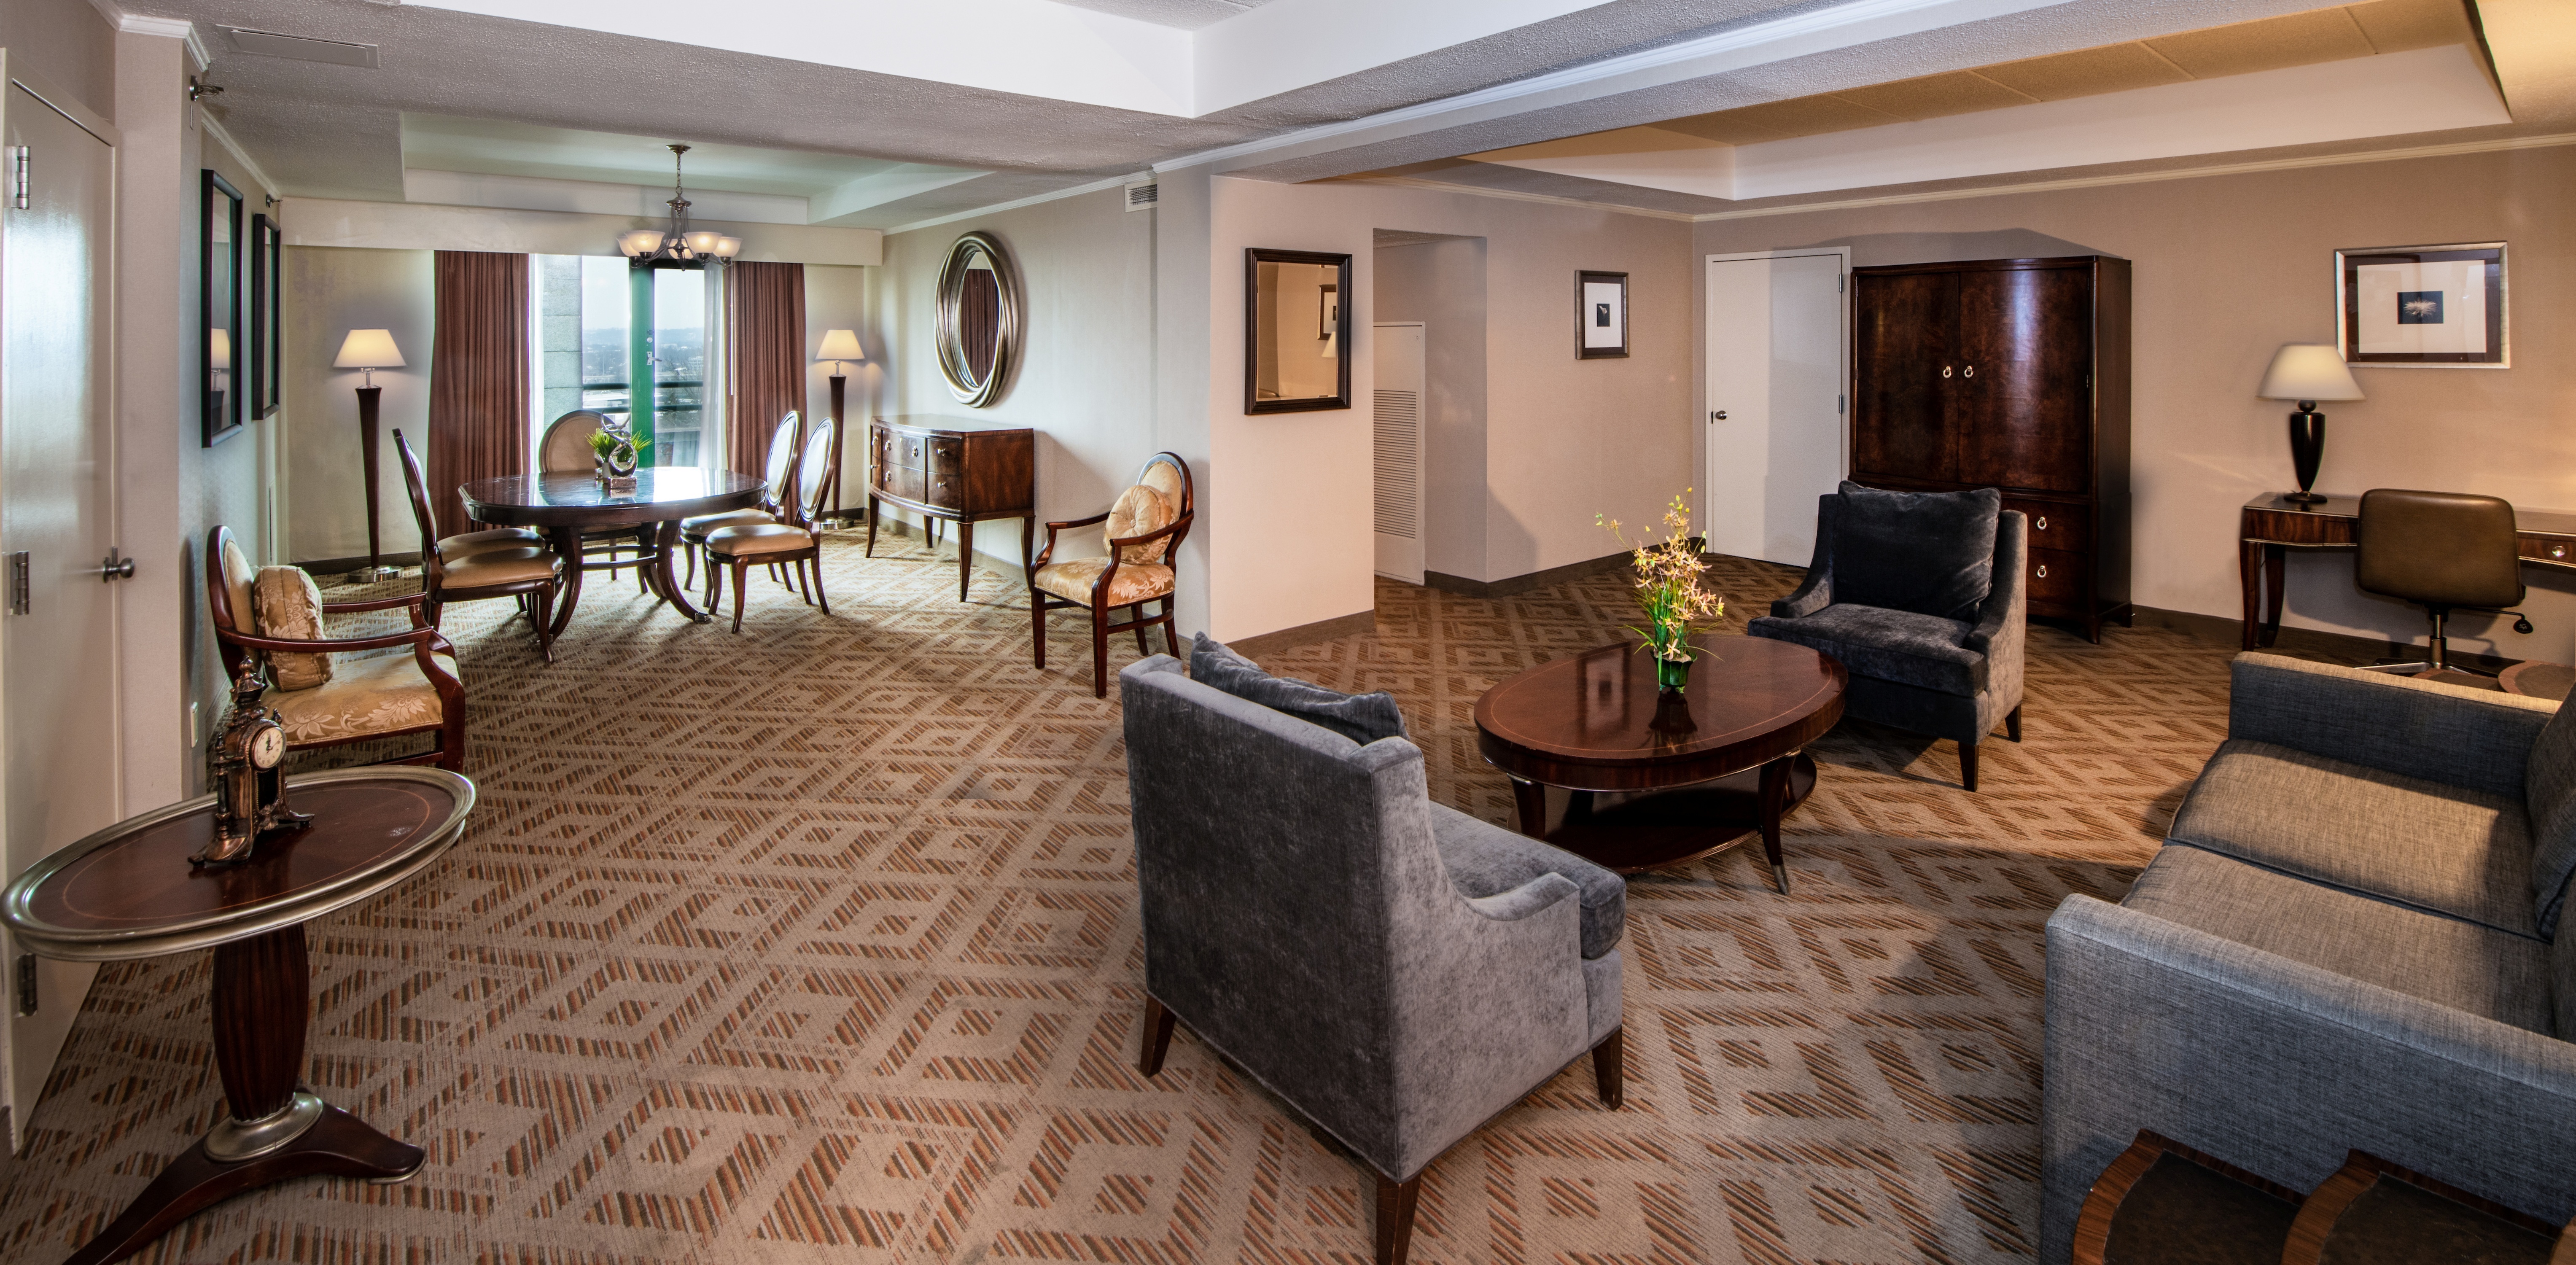 Enjoy deluxe accommodations in the Presidential Suite with a separate living and dining room.